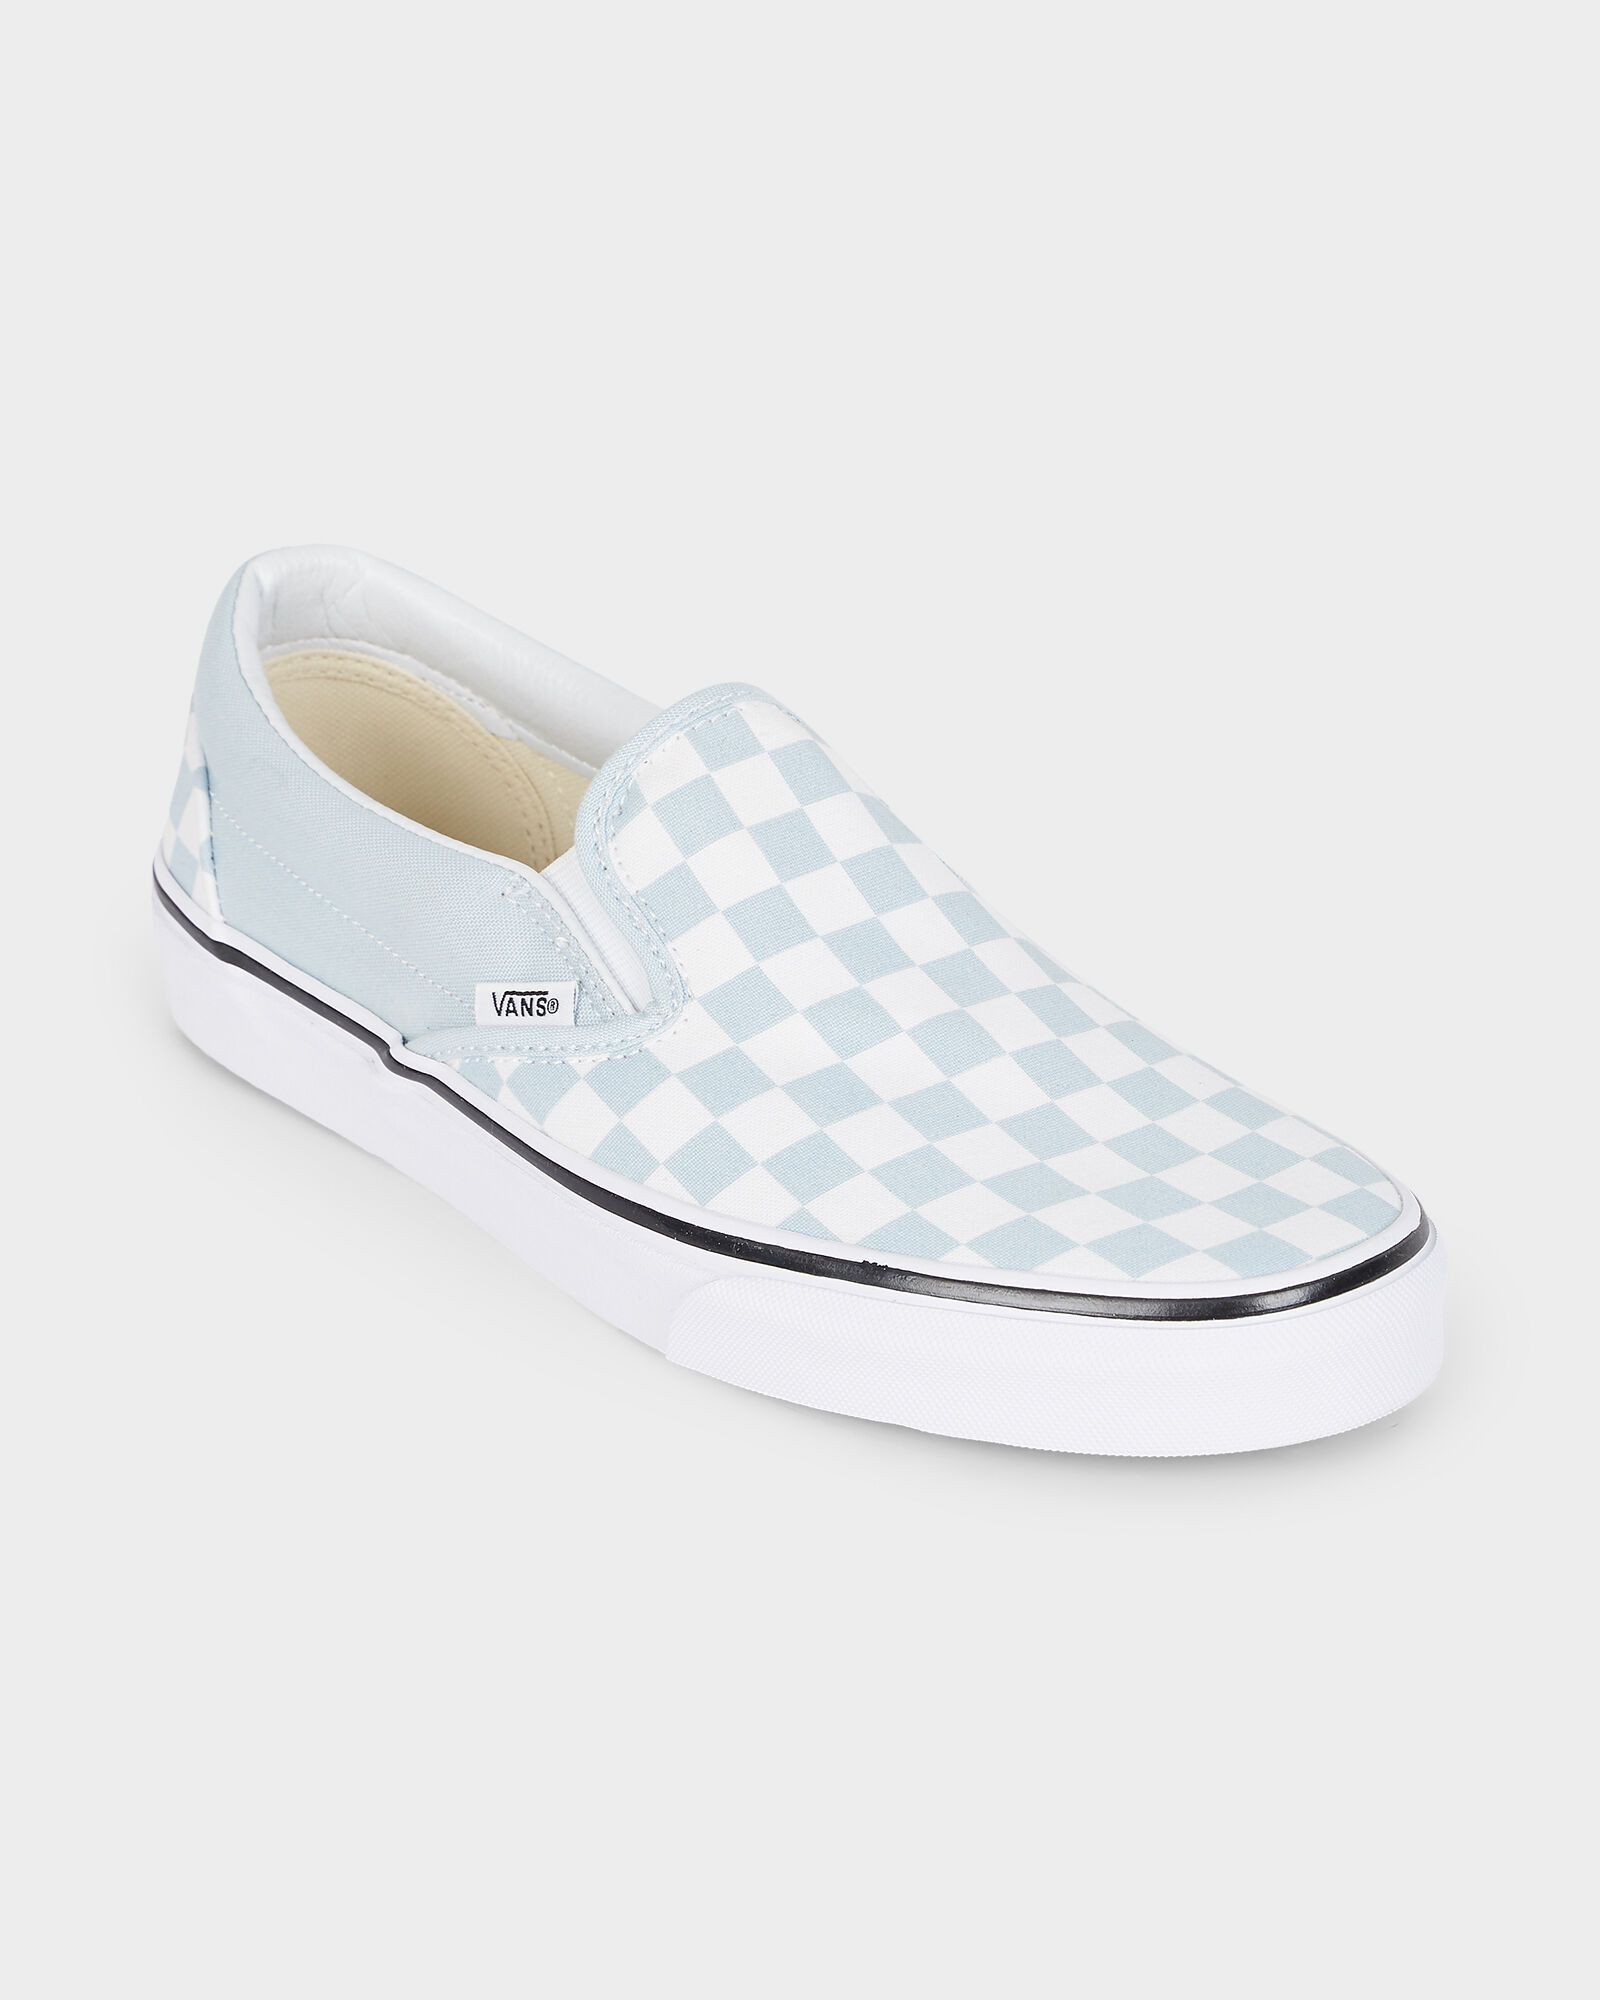 white and white checkerboard vans